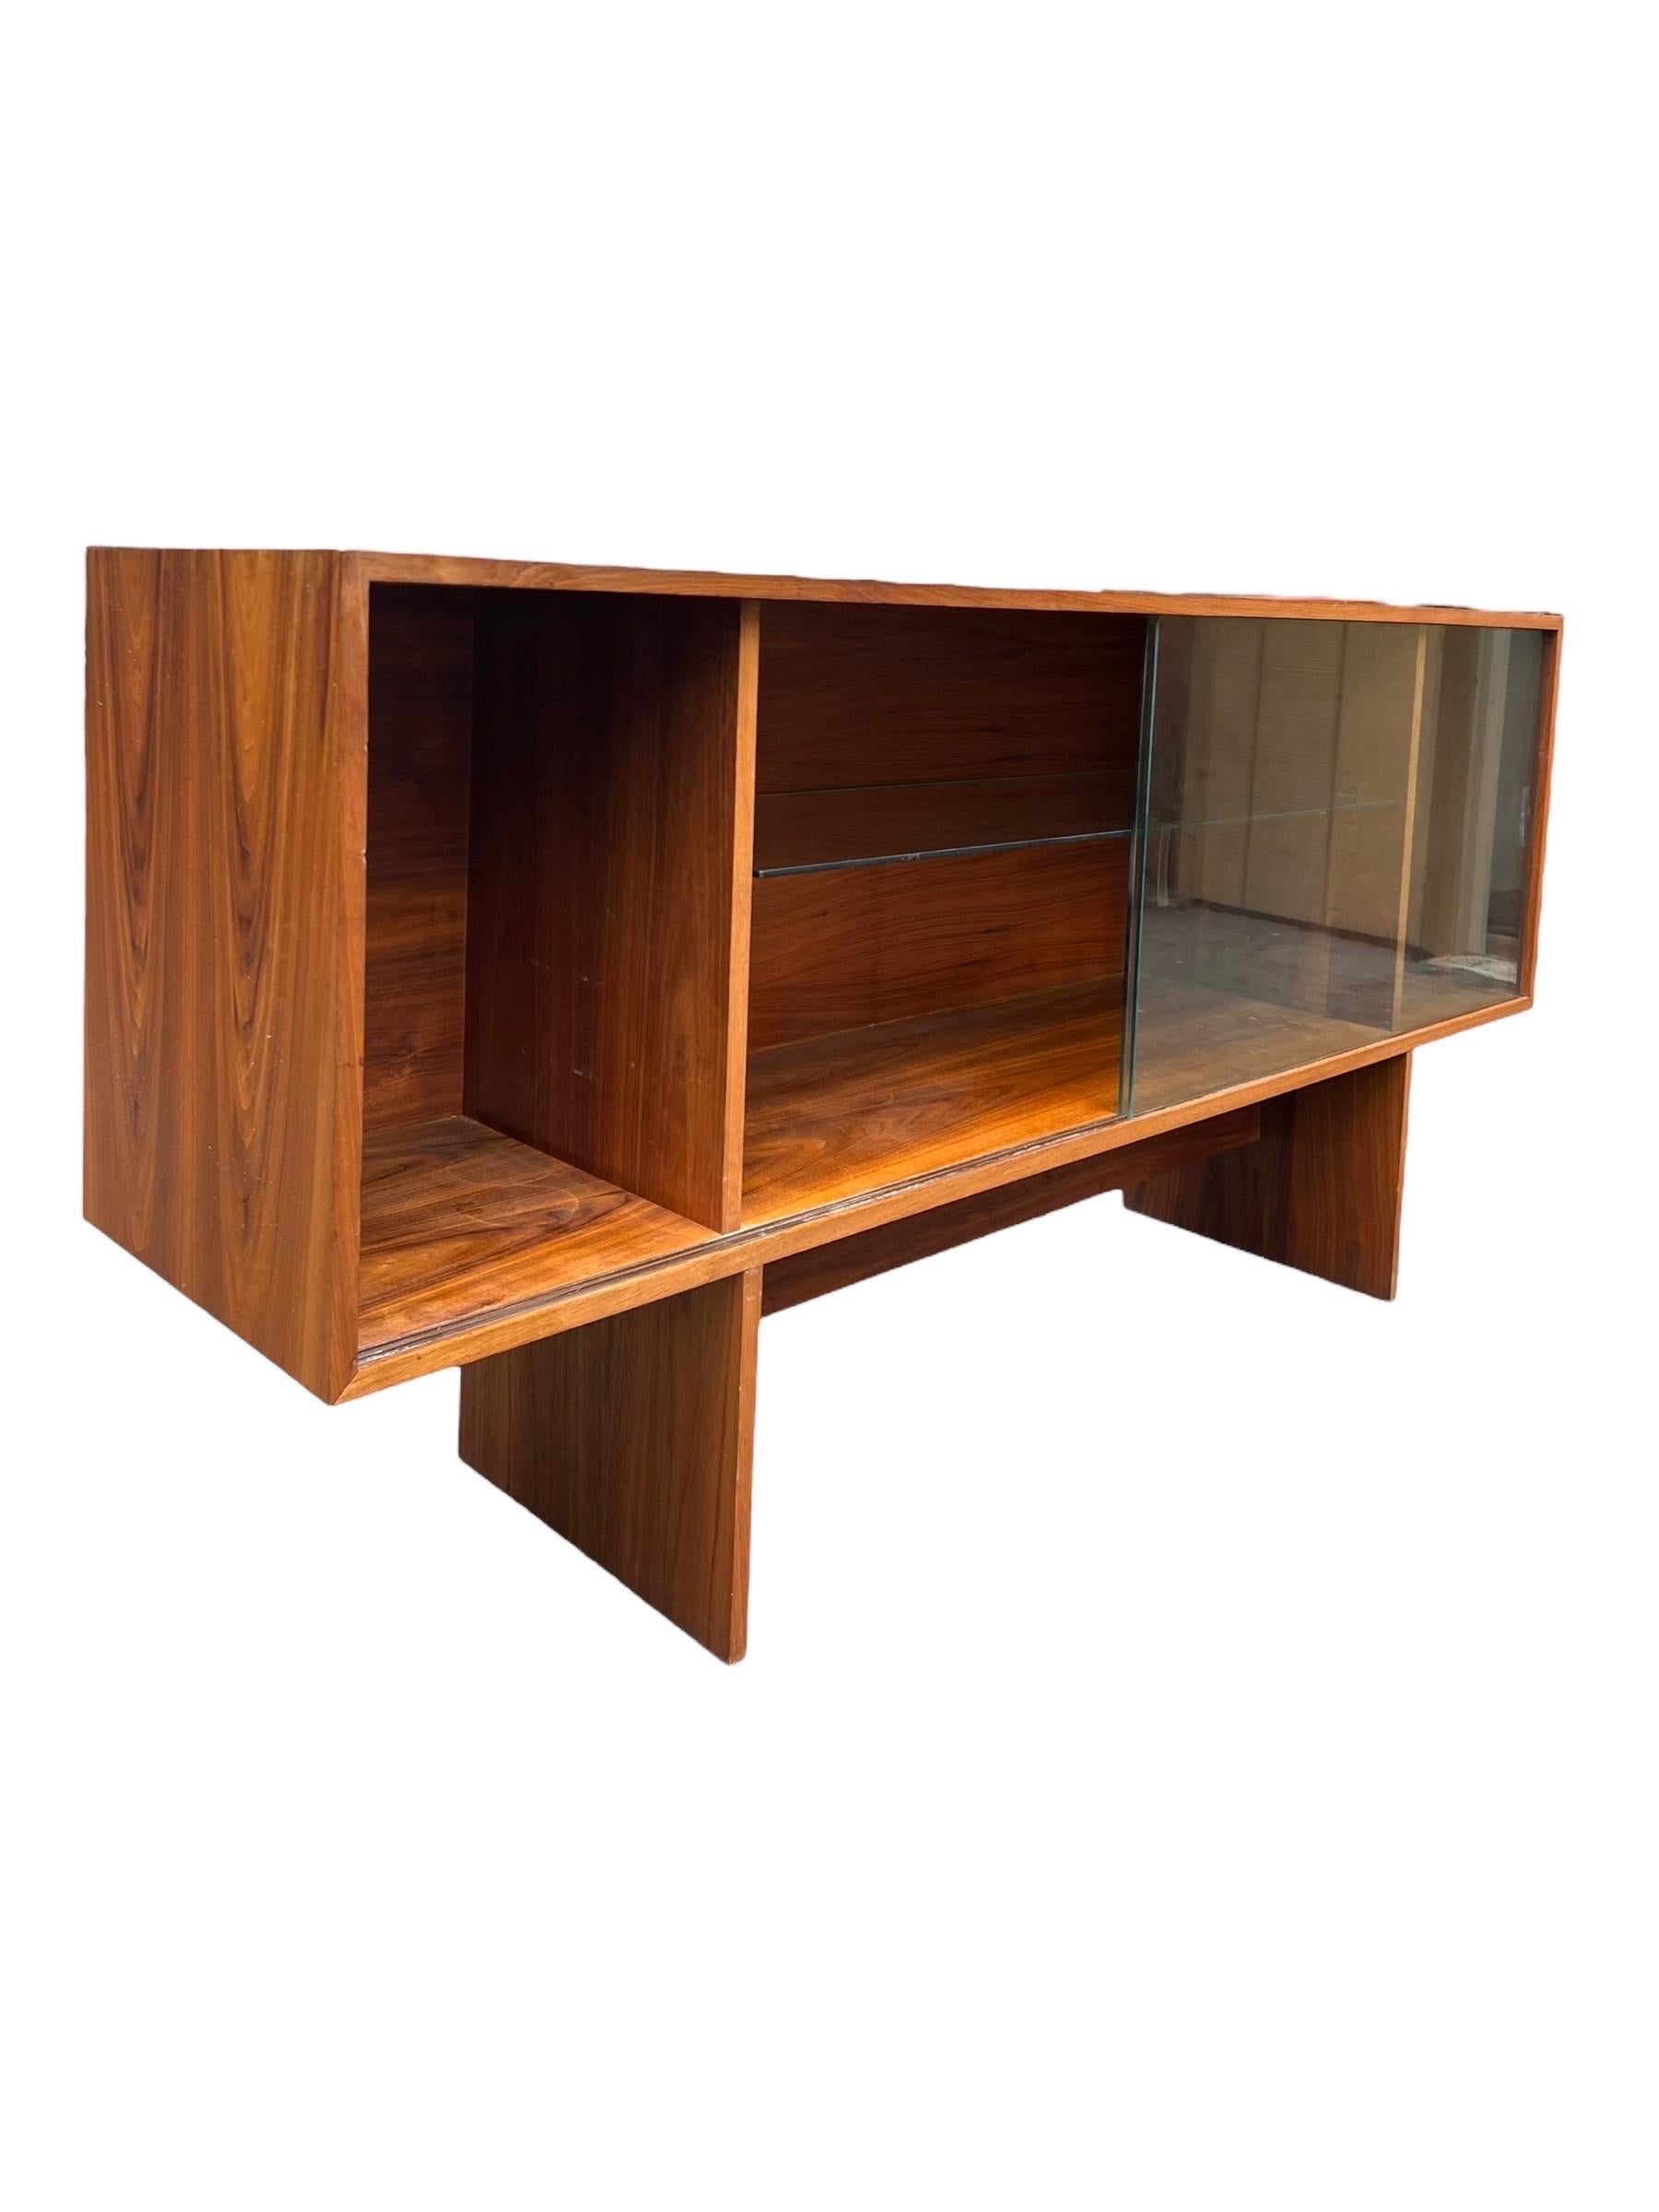 Vintage Mid Century Modern Walnut Wood Book Shelf Display Cabinet  In Good Condition For Sale In Seattle, WA